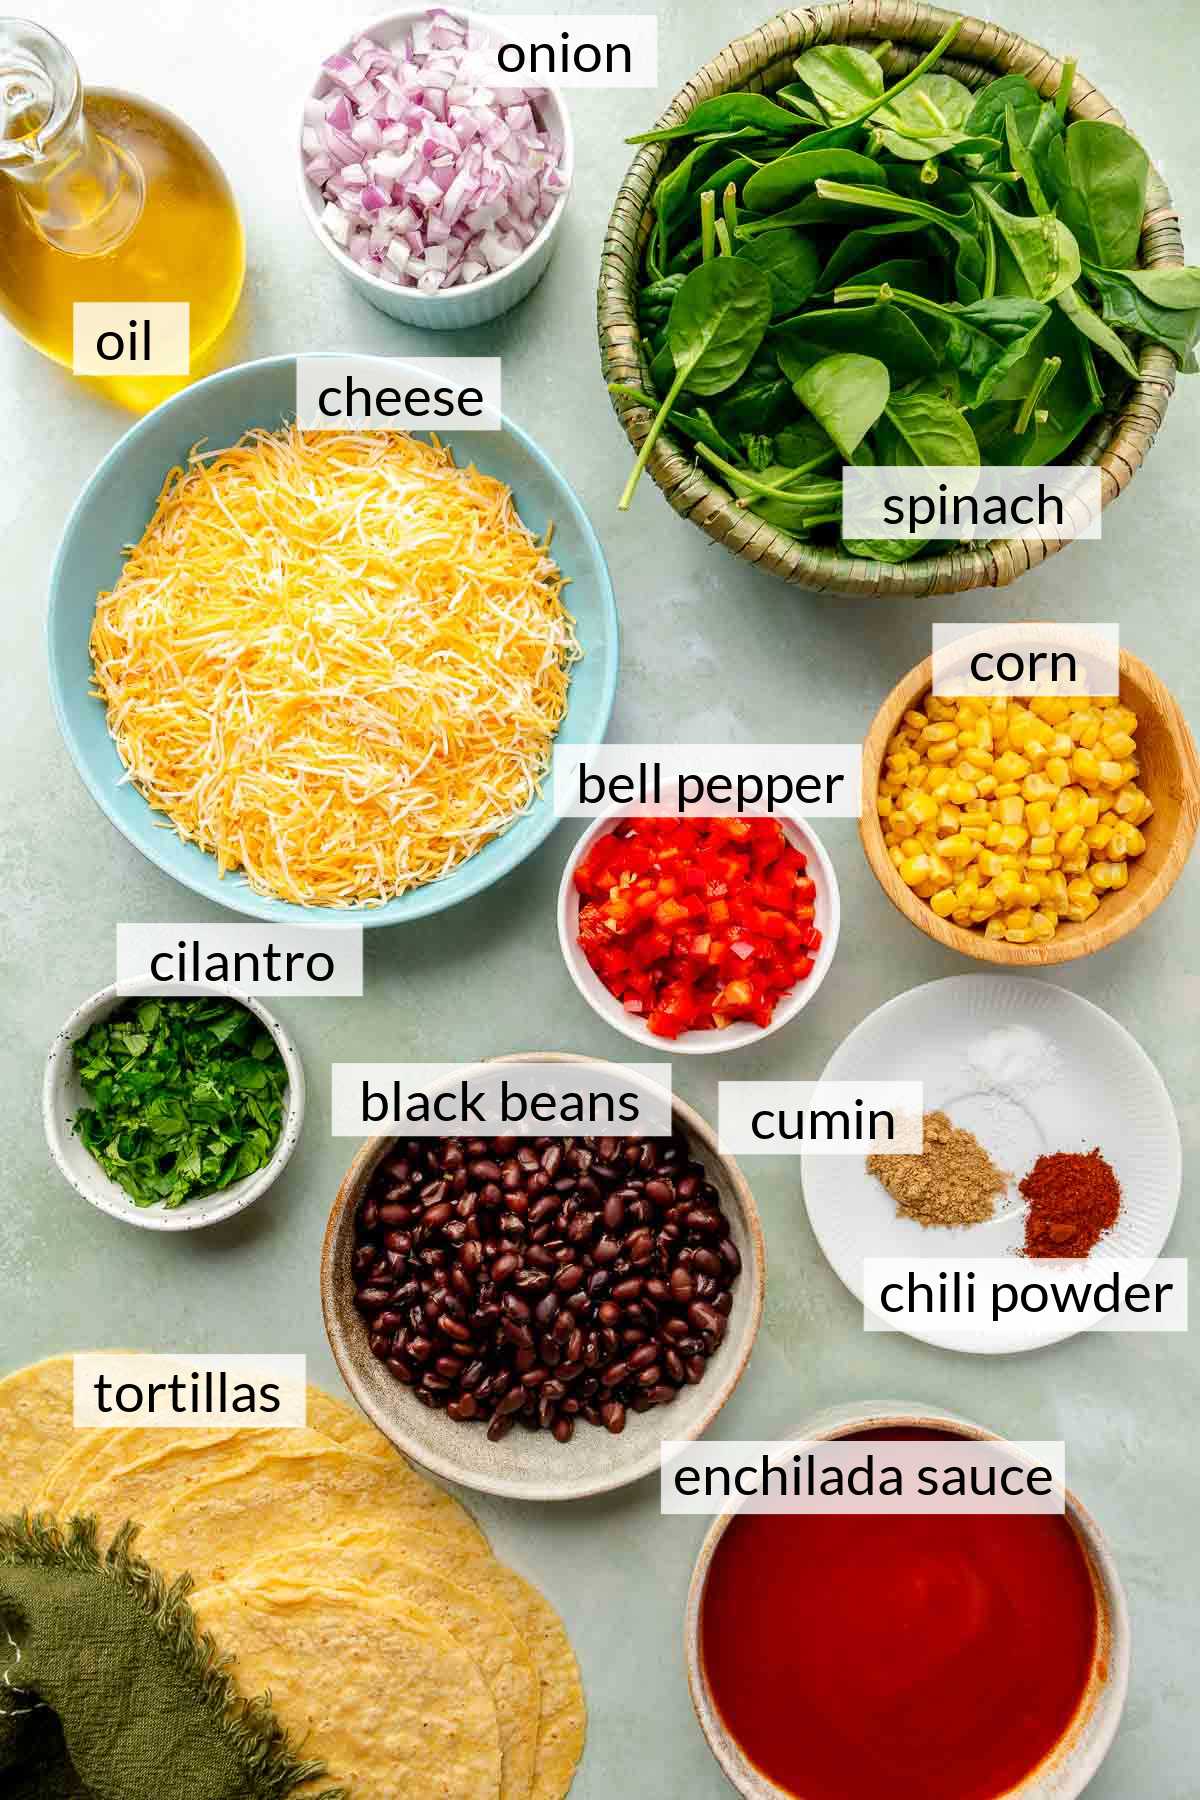 Small bowls filled with spinach, cheese, beans, corn, chopped onion, enchilada sauce and spices.